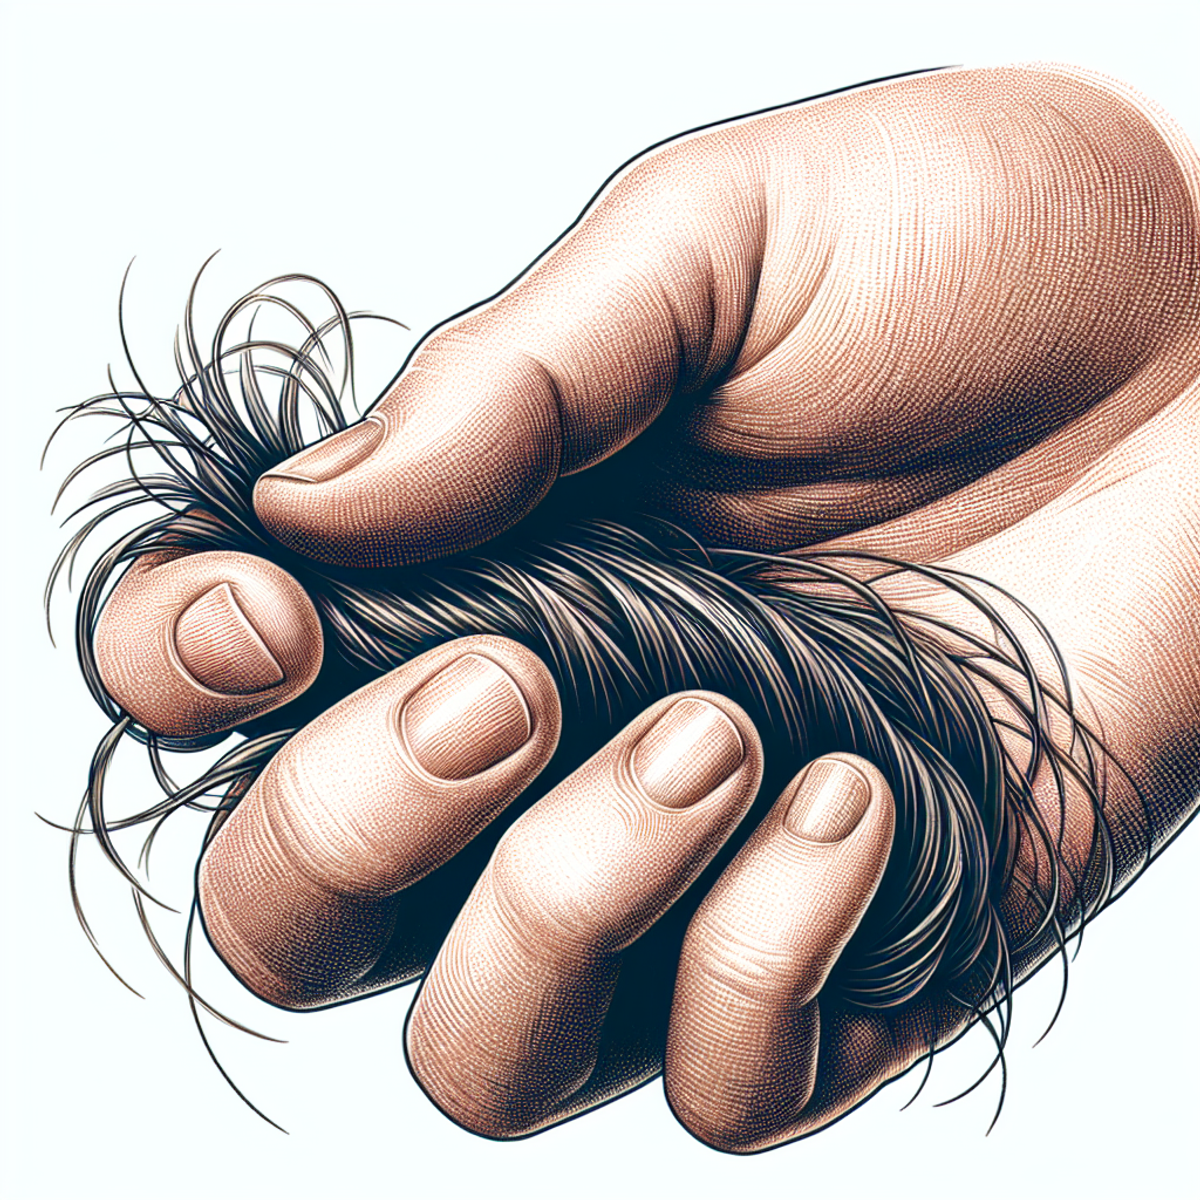 A hand gently holding a strand of hair.